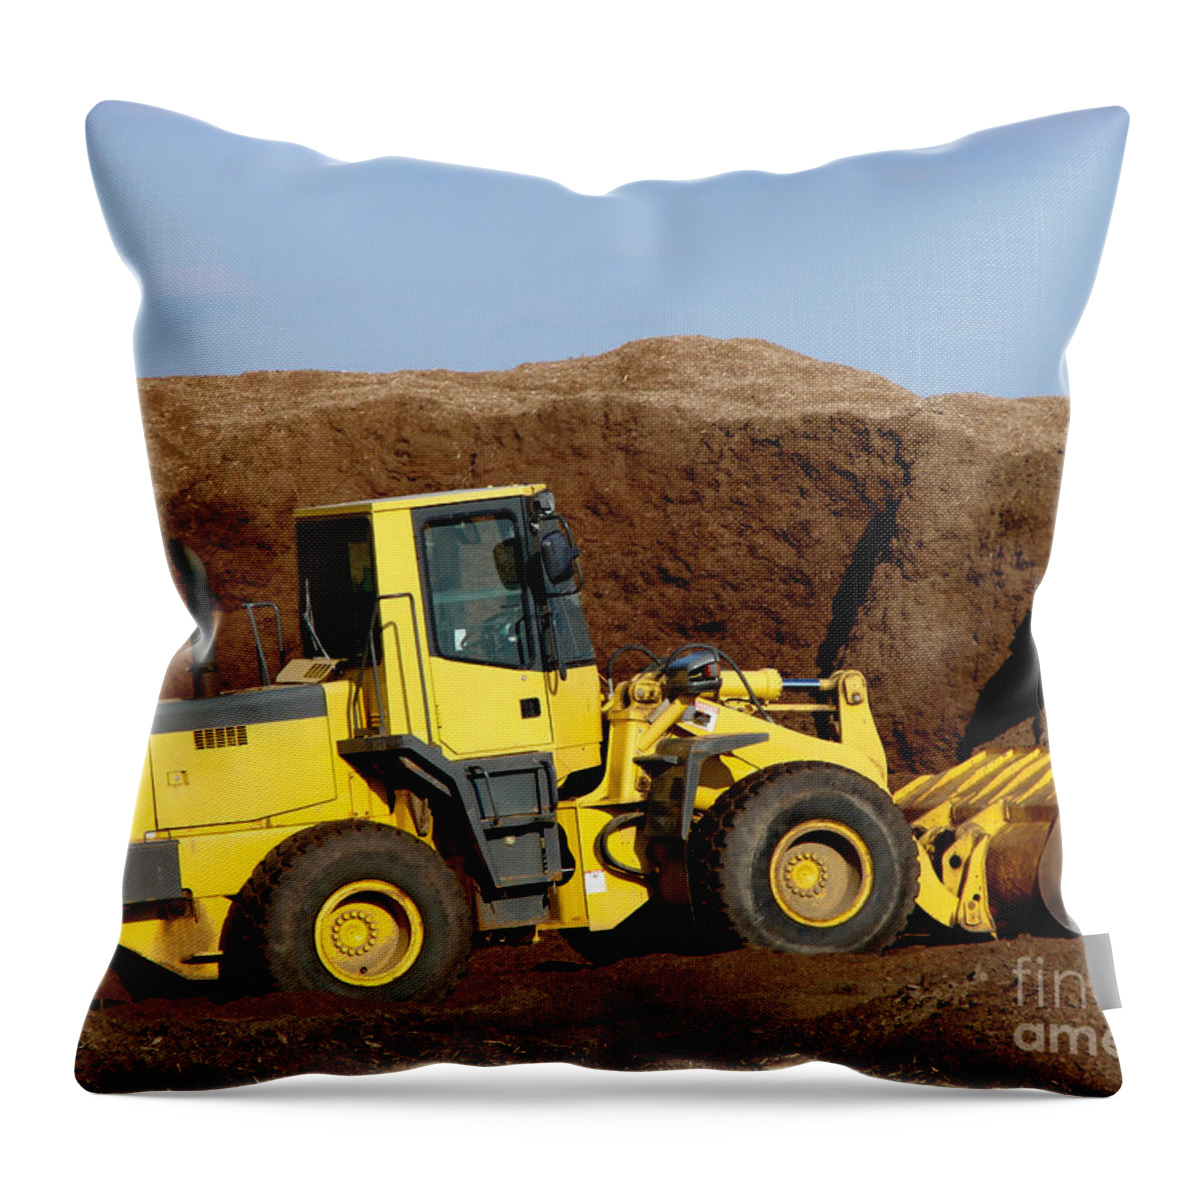 Excavator Throw Pillow featuring the photograph Excavation by Olivier Le Queinec